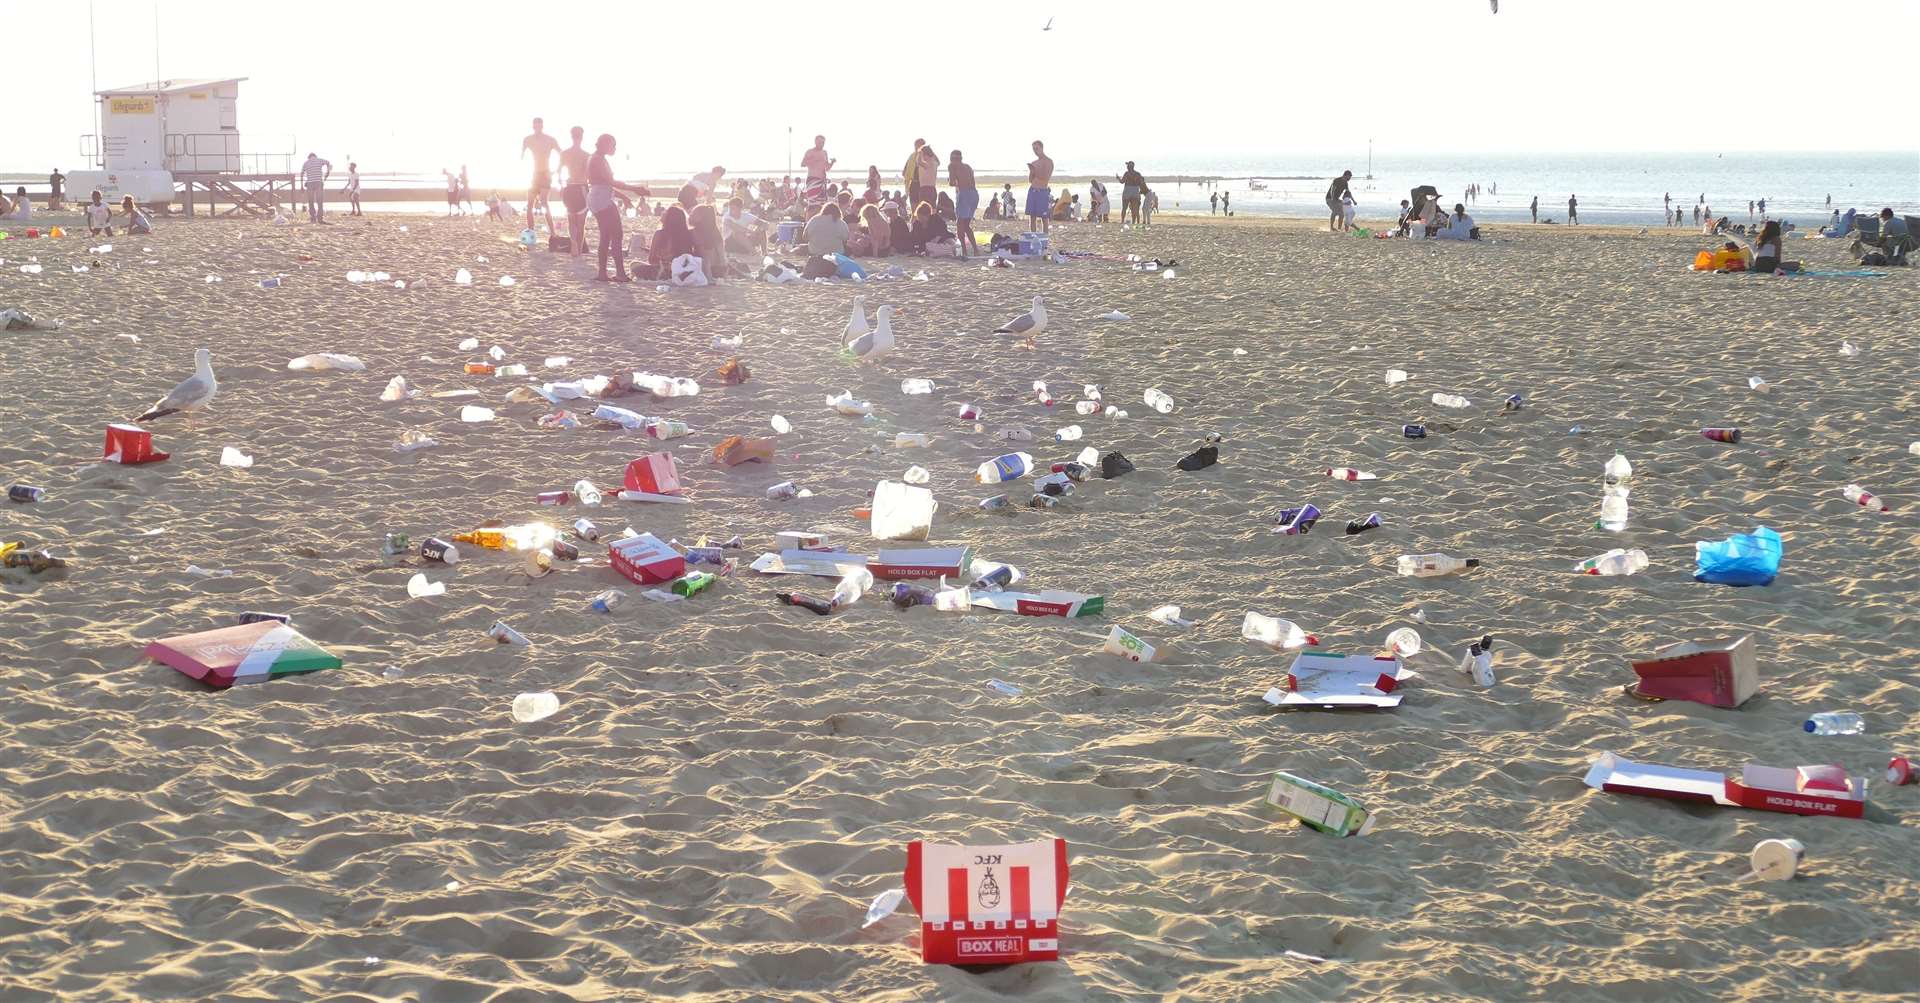 Margate main sands strewn with rubbish after visitors leave one day last summer. Picture: Frank Leppard Photography